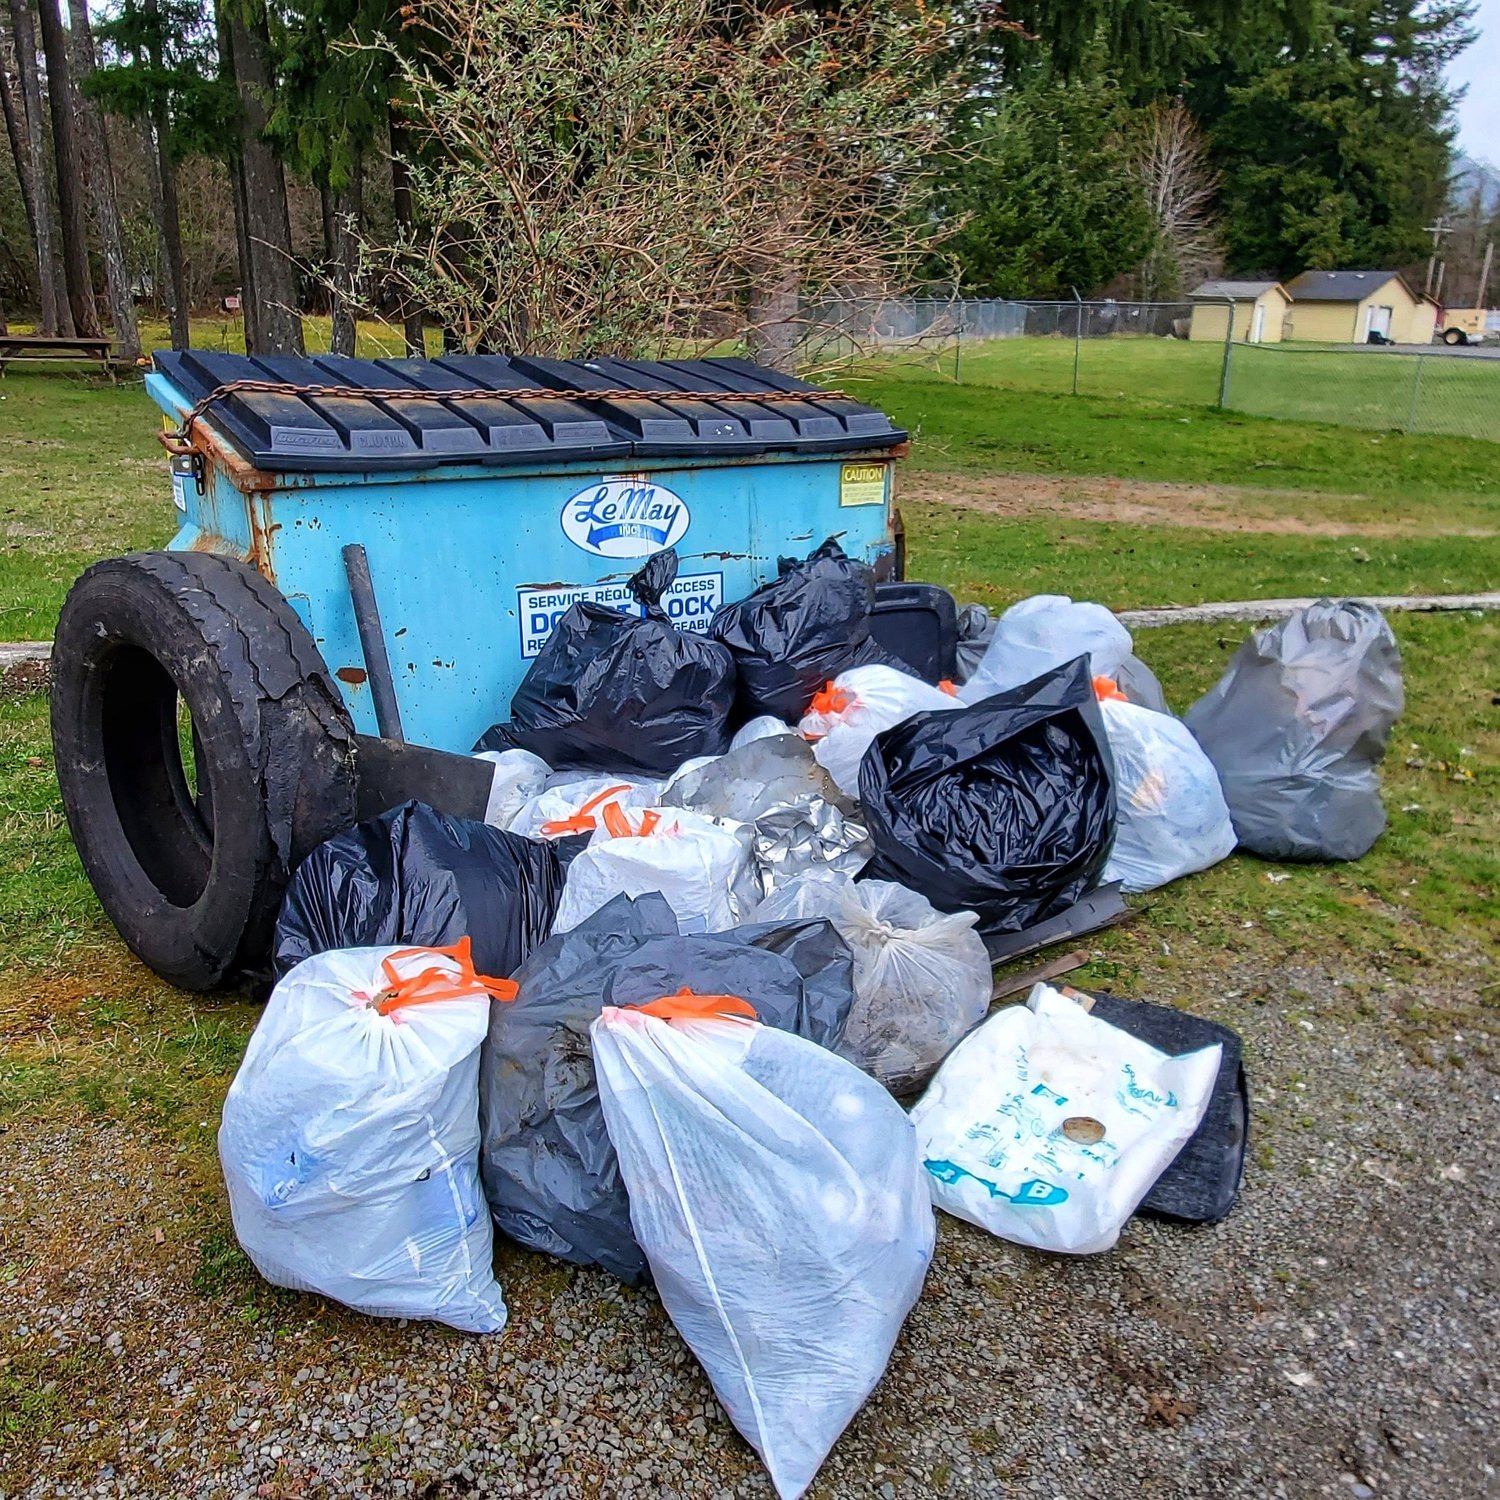 The group’s Facebook group — founded in May of last year with more than 260 current and past members — is littered with photos of trash hauls, its volunteers, sites of natural beauty, recreational resources and, of course, the principles of “leave no trace.”